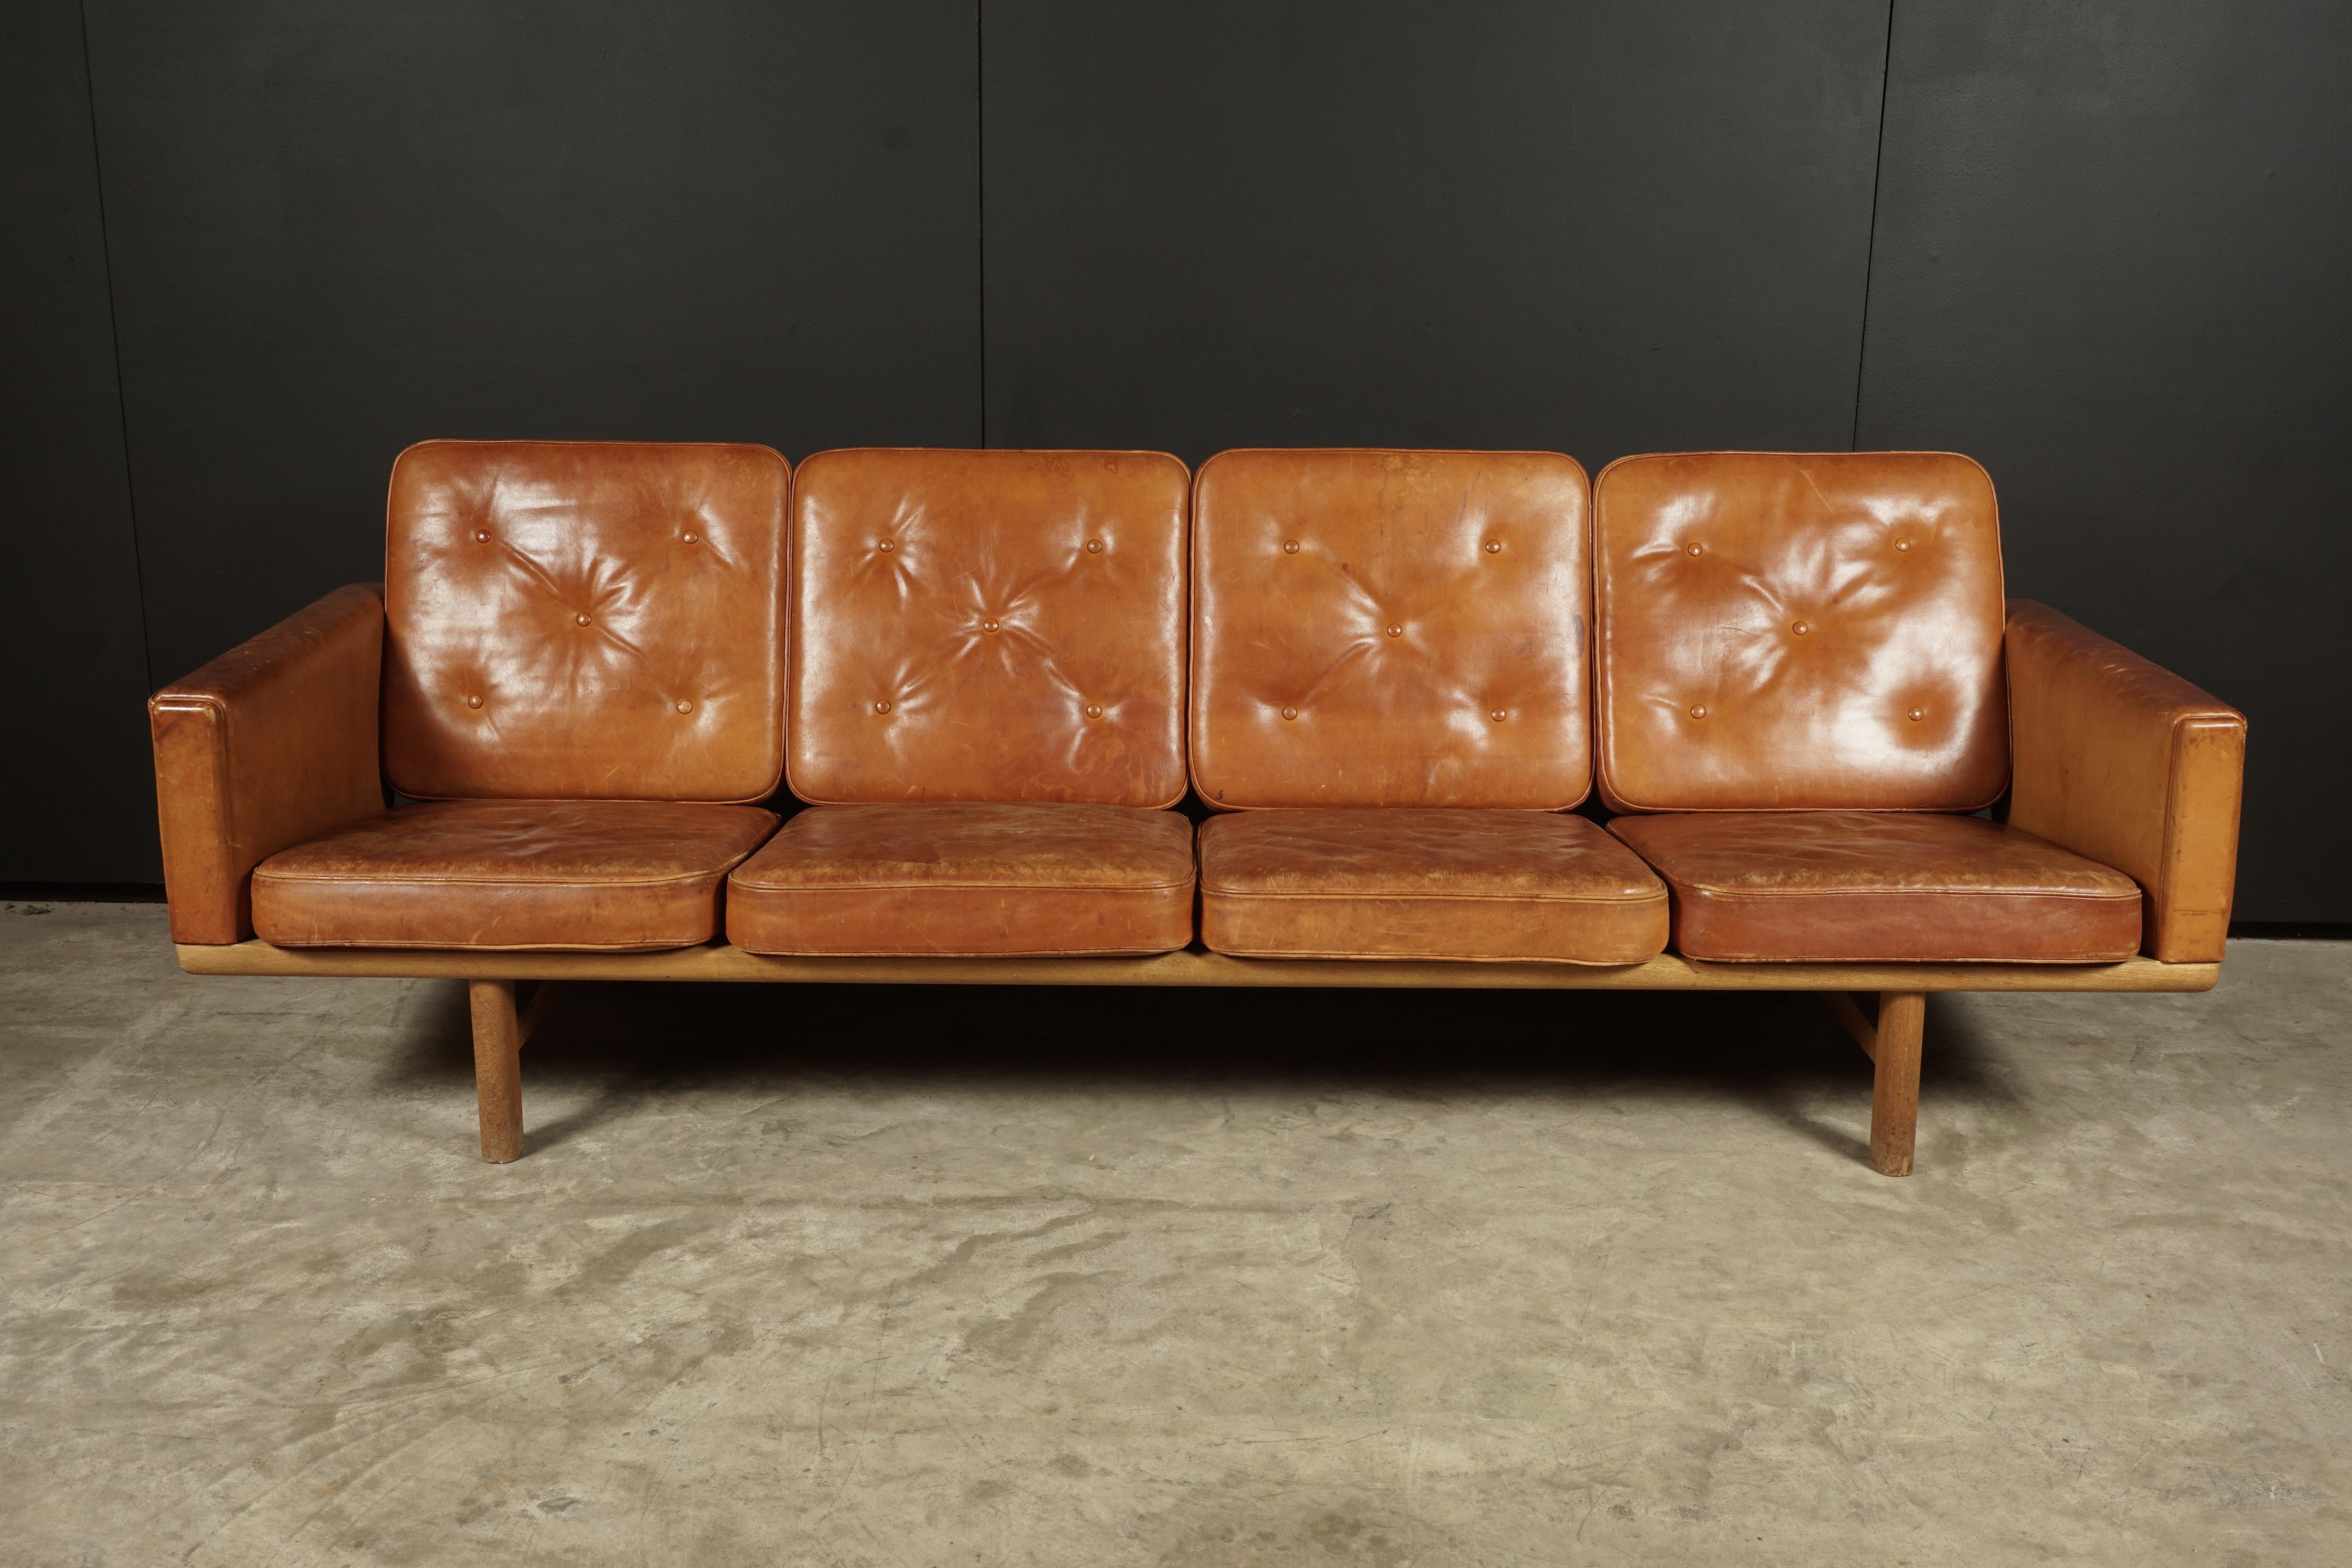 Vintage leather sofa designed by Hans Wegner, Model 236, Denmark 1950s. Original Cognac leather upholstery with amazing patina and wear. Solid oak frame with original cushions Manufactured by GETAMA, Denmark and stamped underneath.